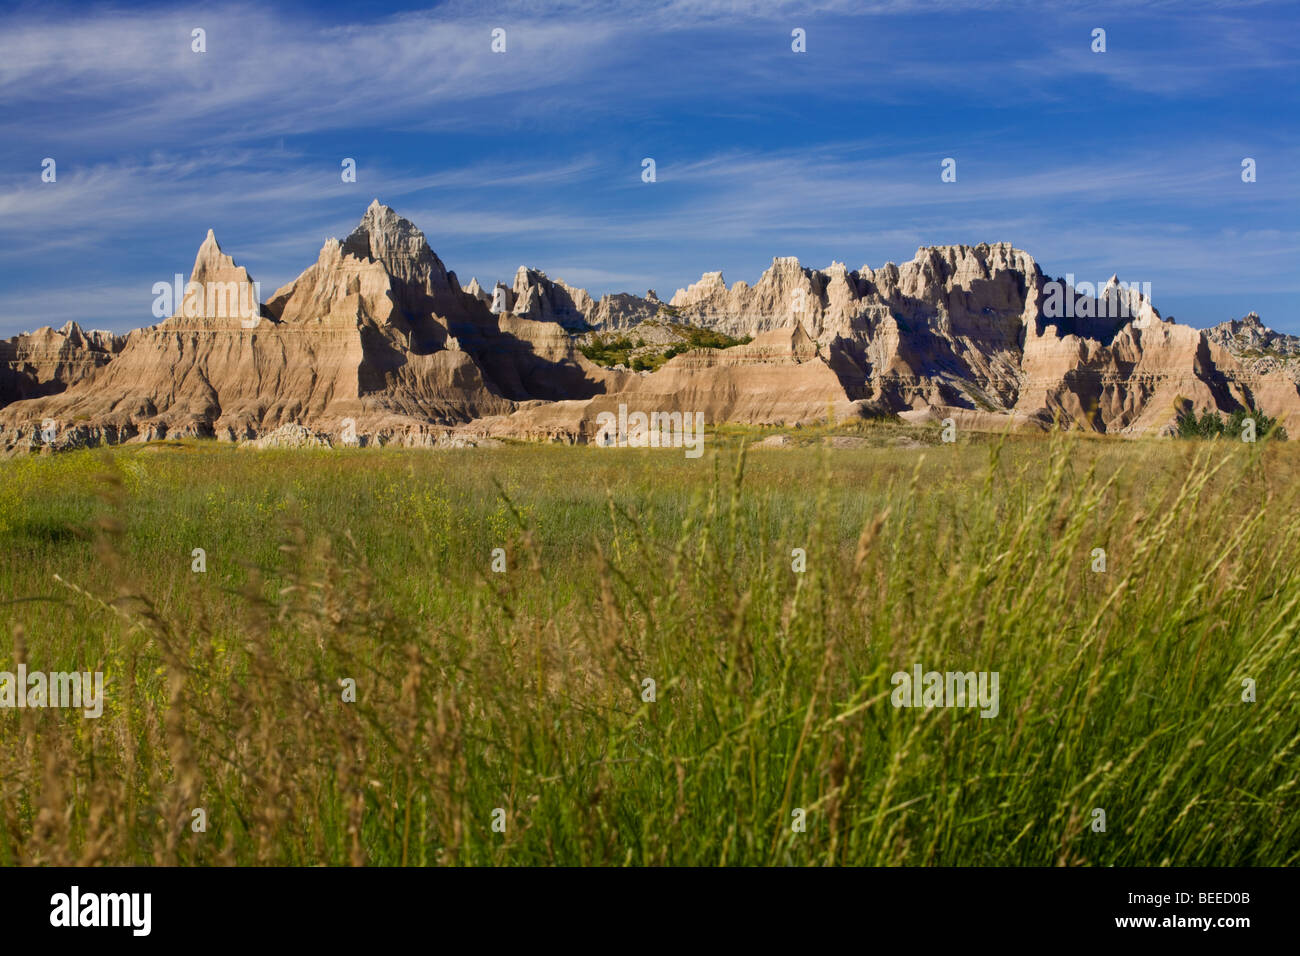 Eroded buttes pinnacles and spires in Badlands National Park, South Dakota Stock Photo